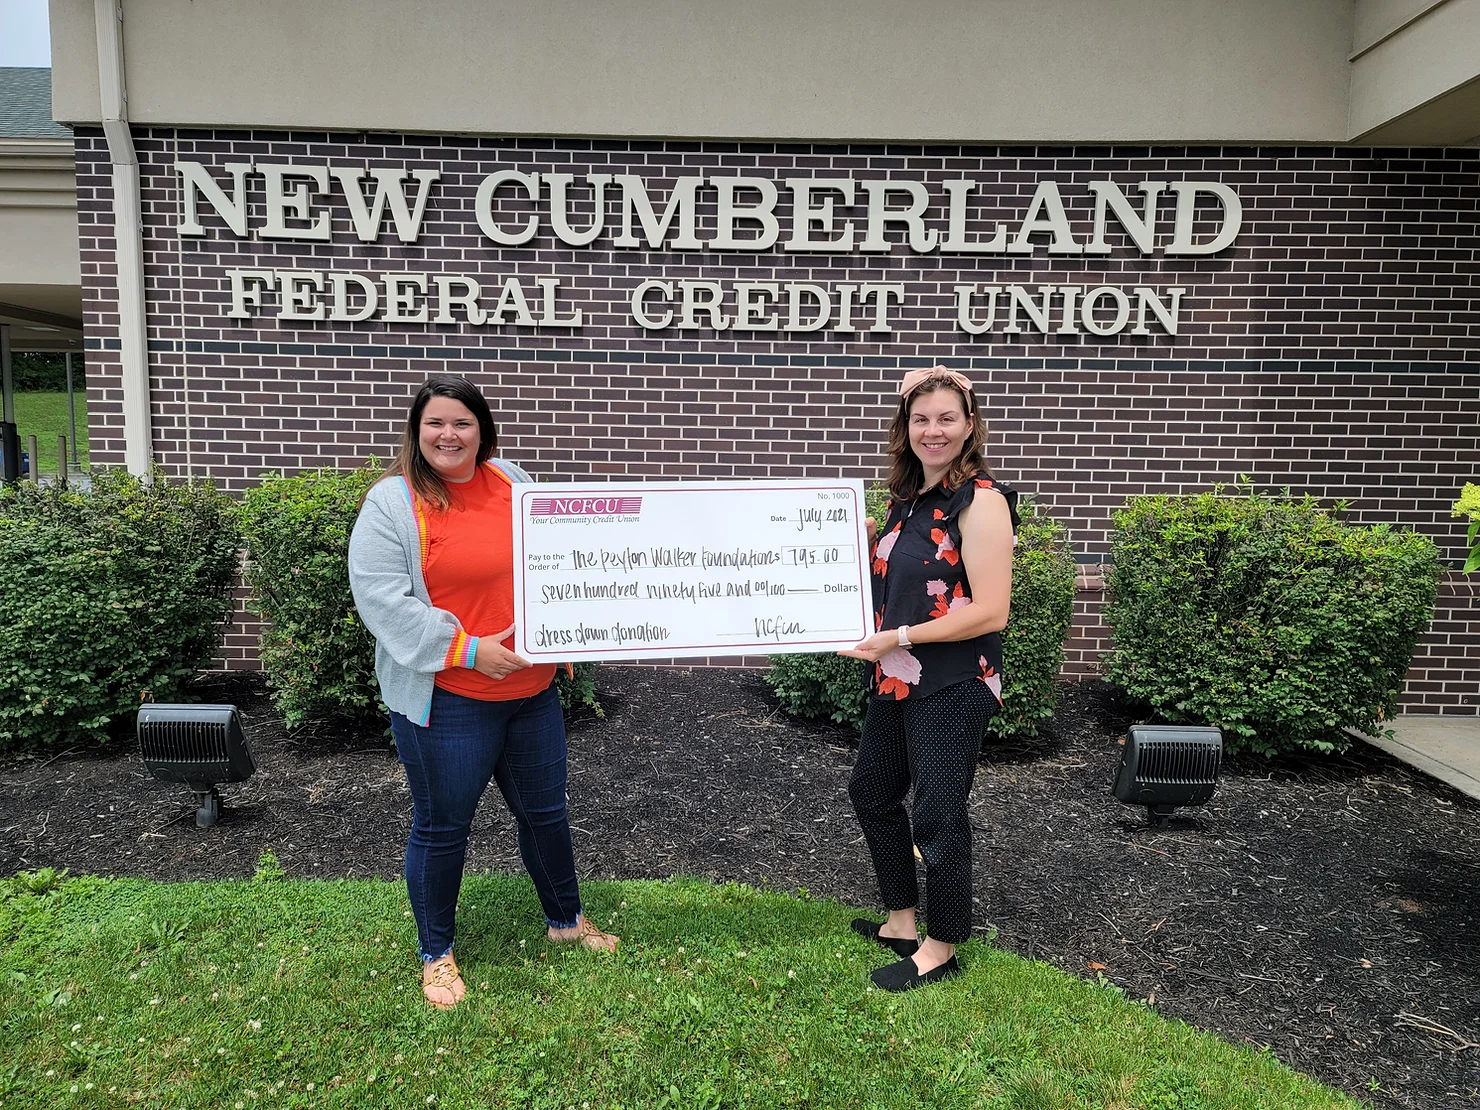 NCFCU selects The Peyton Walker Foundation as Charity Dress Down Fundraiser recipient featured image